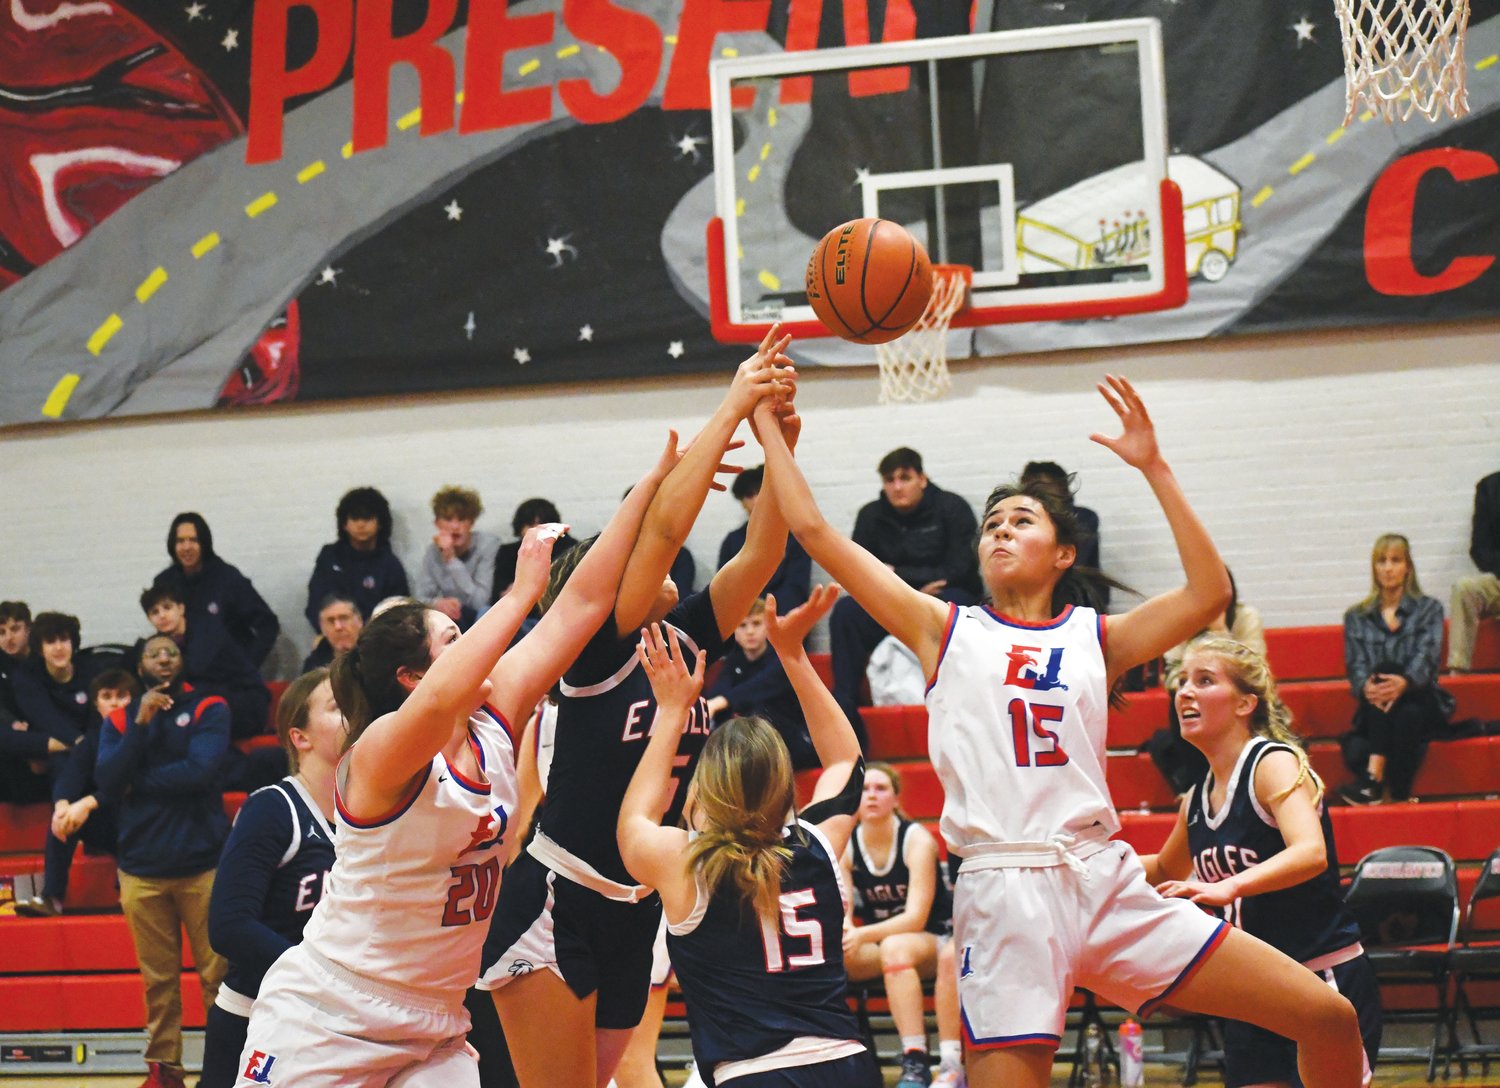 EJ’s Alyssa Vandenberg and Penina Vailolo reach for a rebound while surrounded by Eagles players.